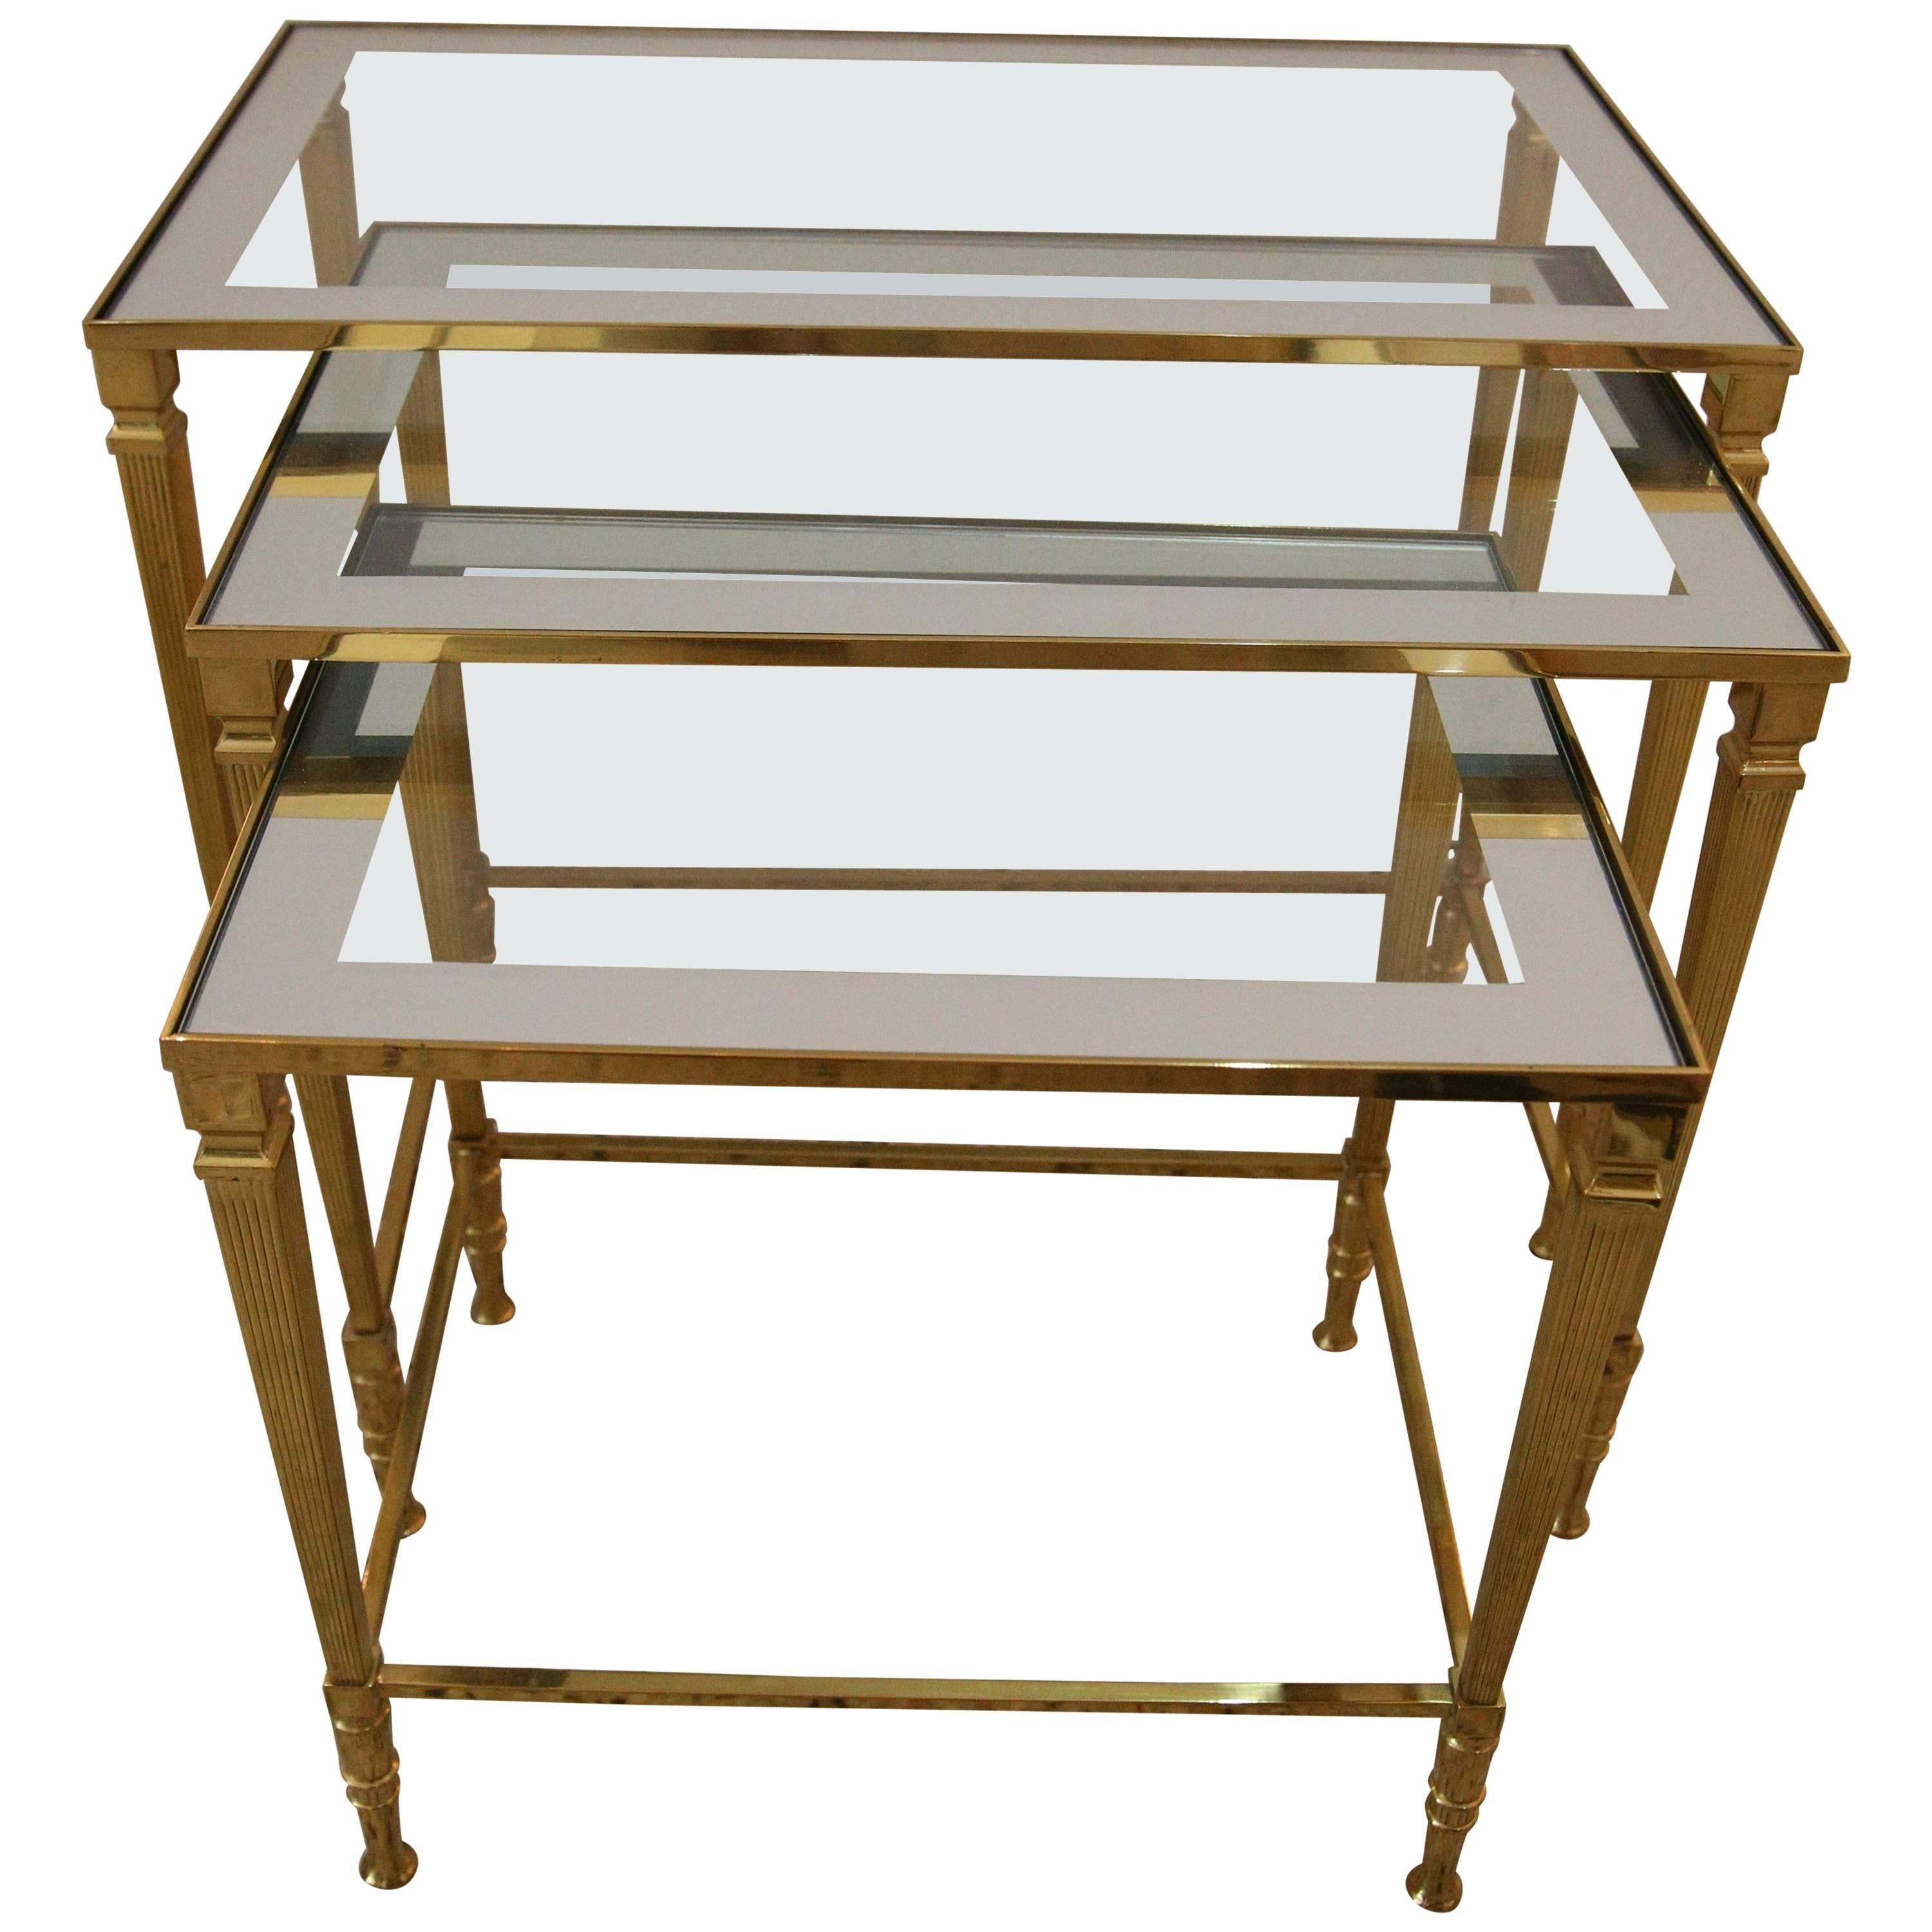  Nesting Tables in Brass, Glass and Mirror